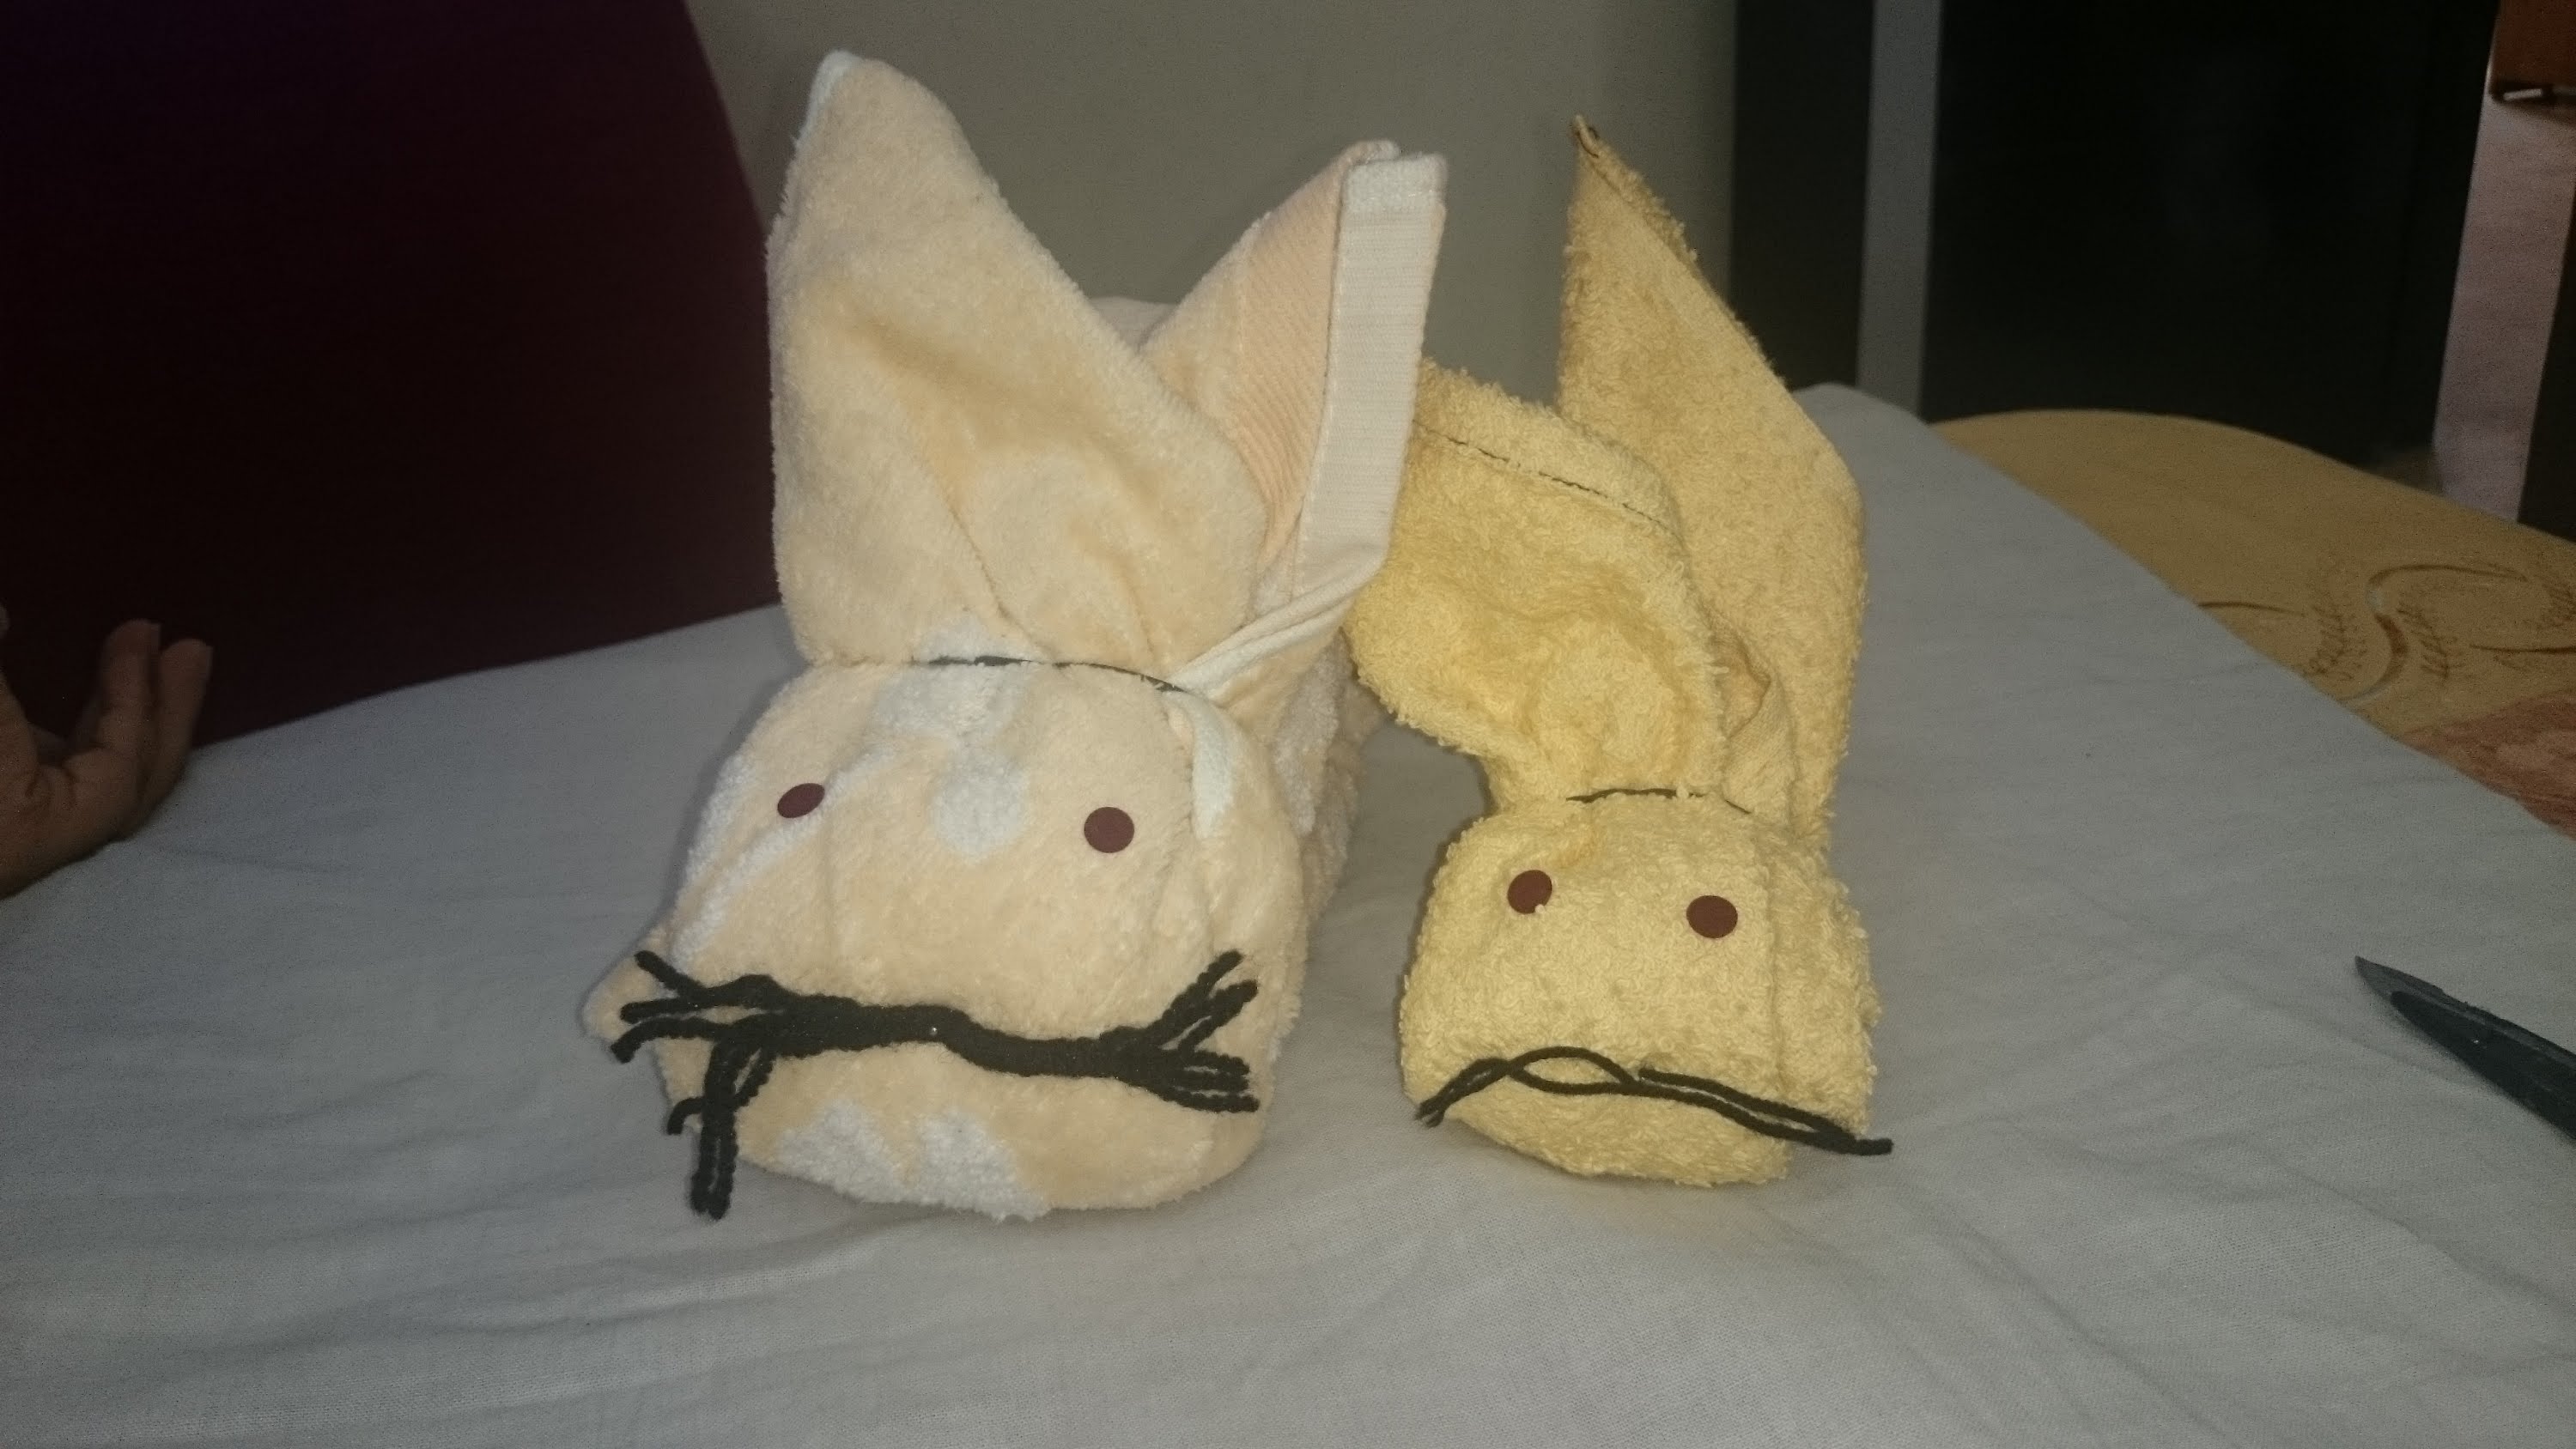 Decorate your house with a Towel Rabbit | Towel Art Rabbit | Towel ...